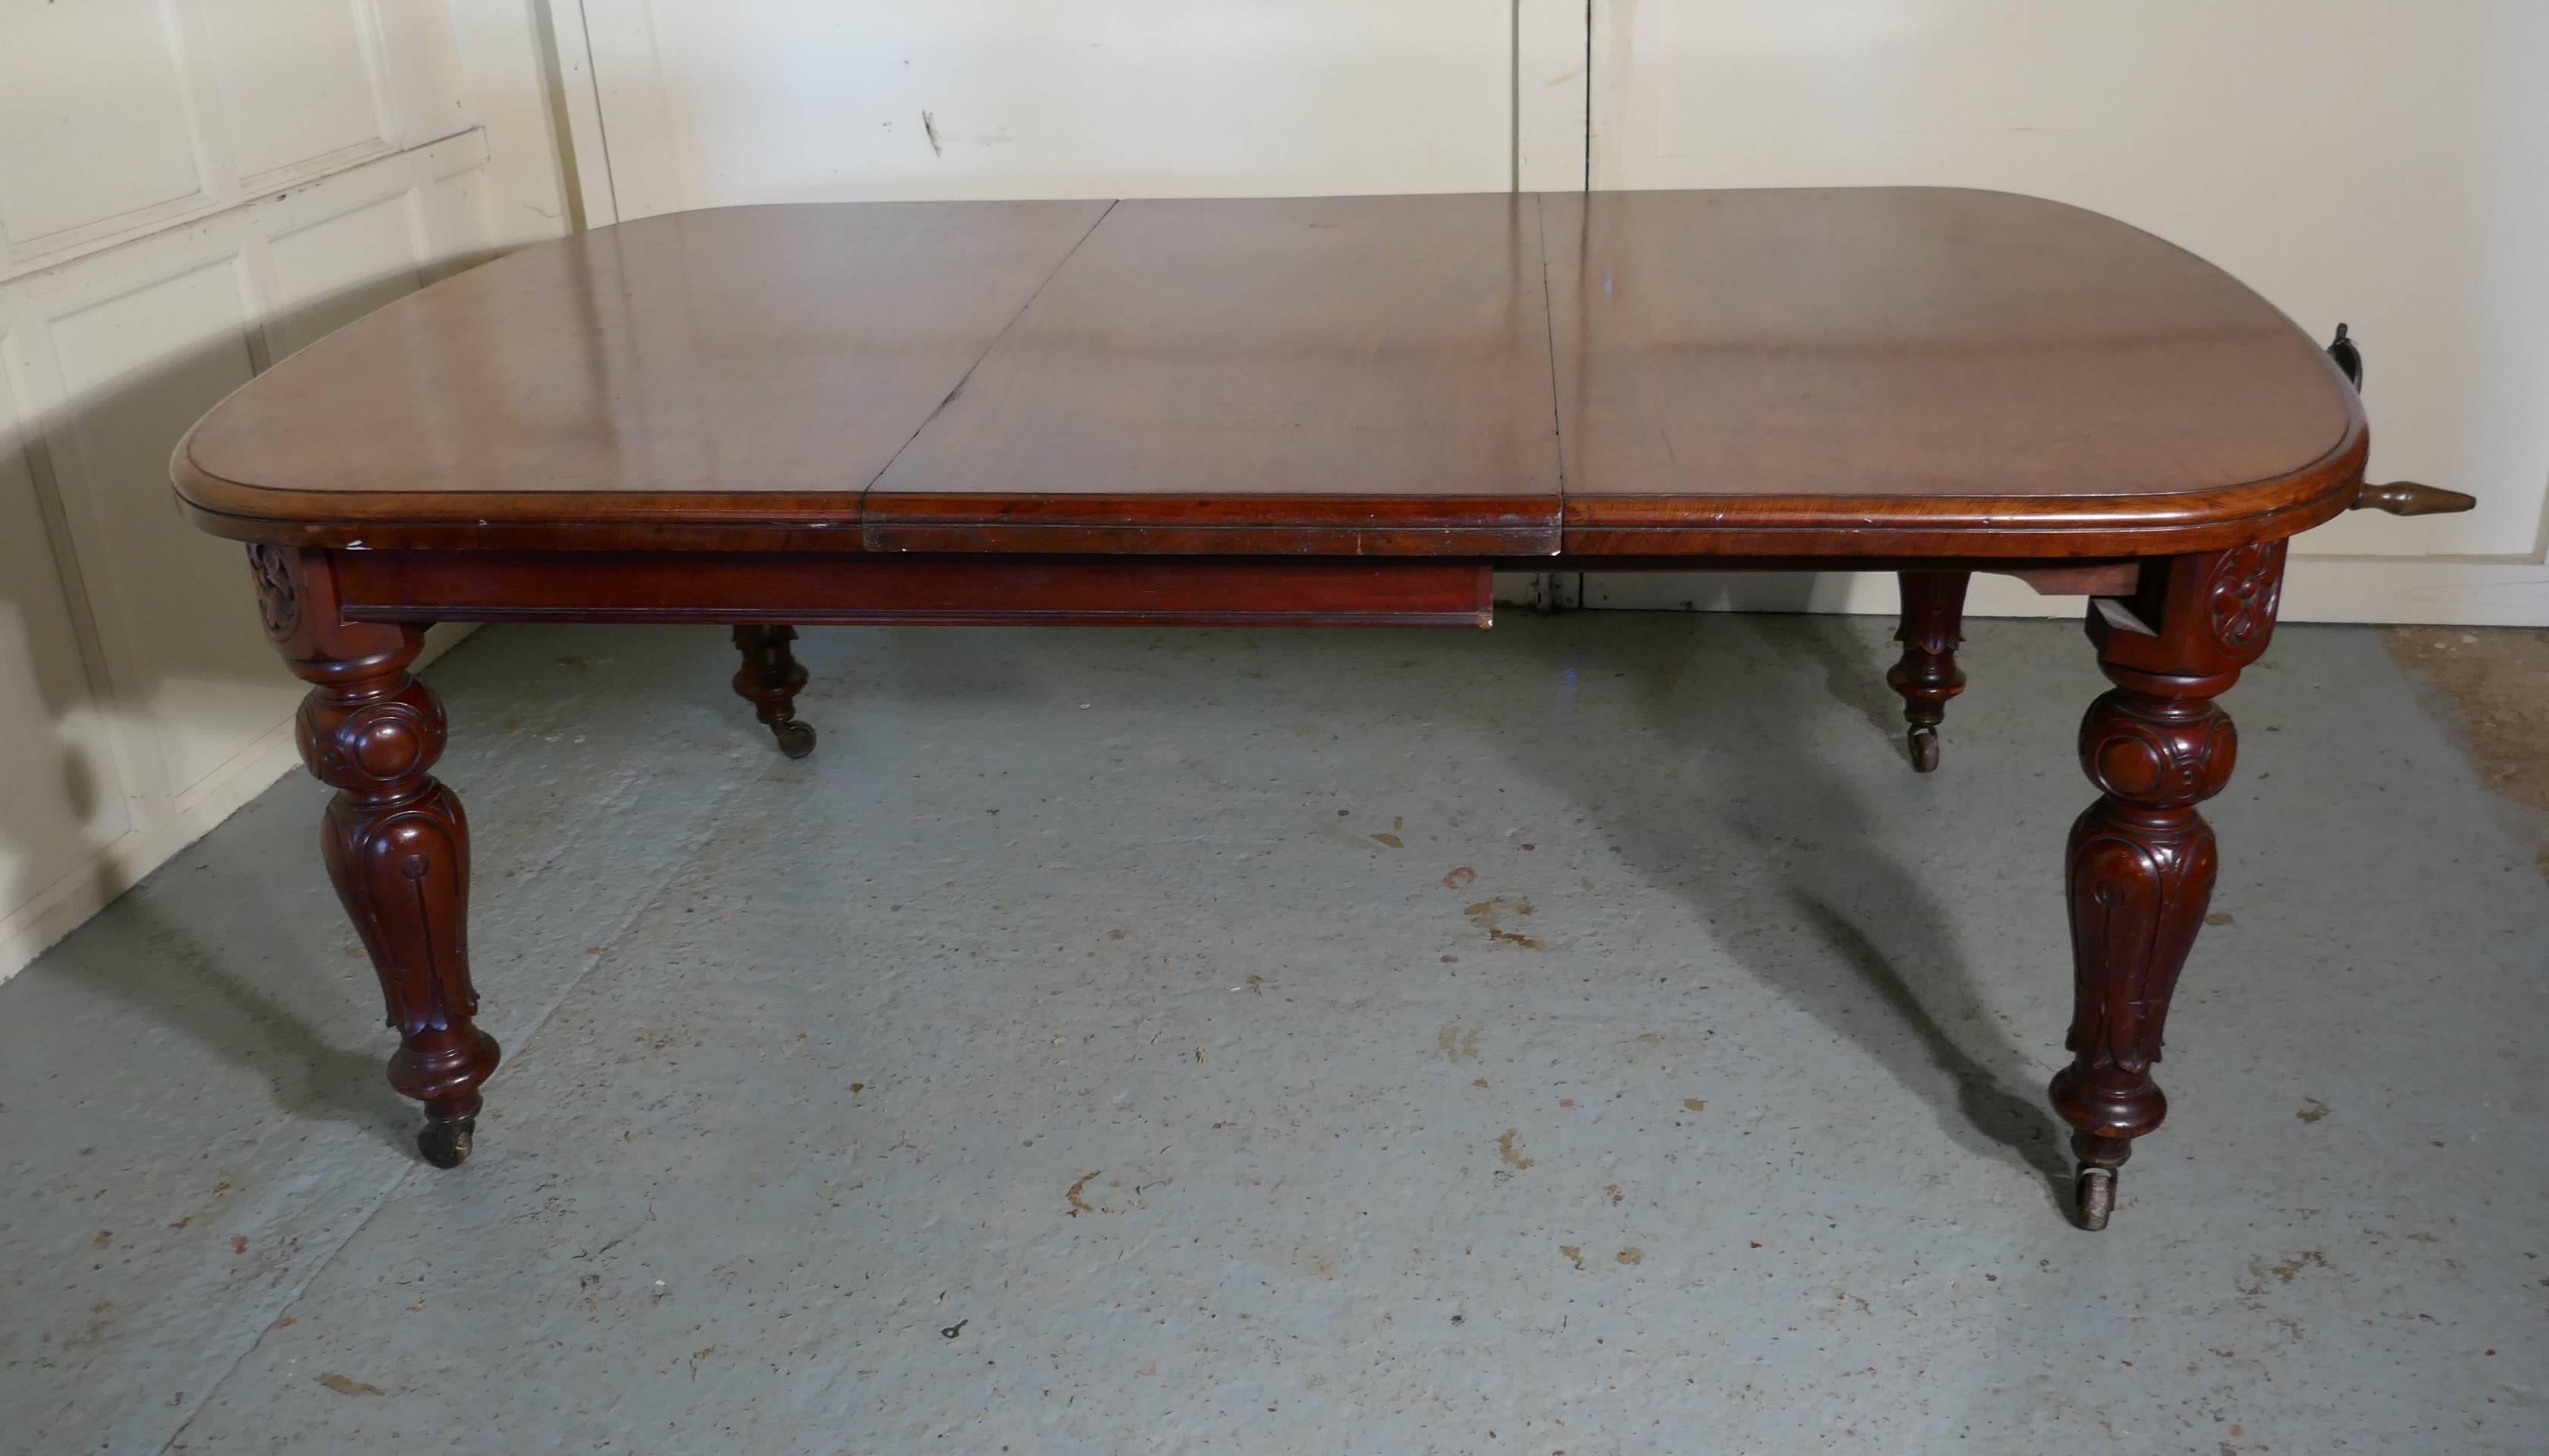 19th Century Early Victorian Mahogany Extending Dining Table, Seats 12 Diners